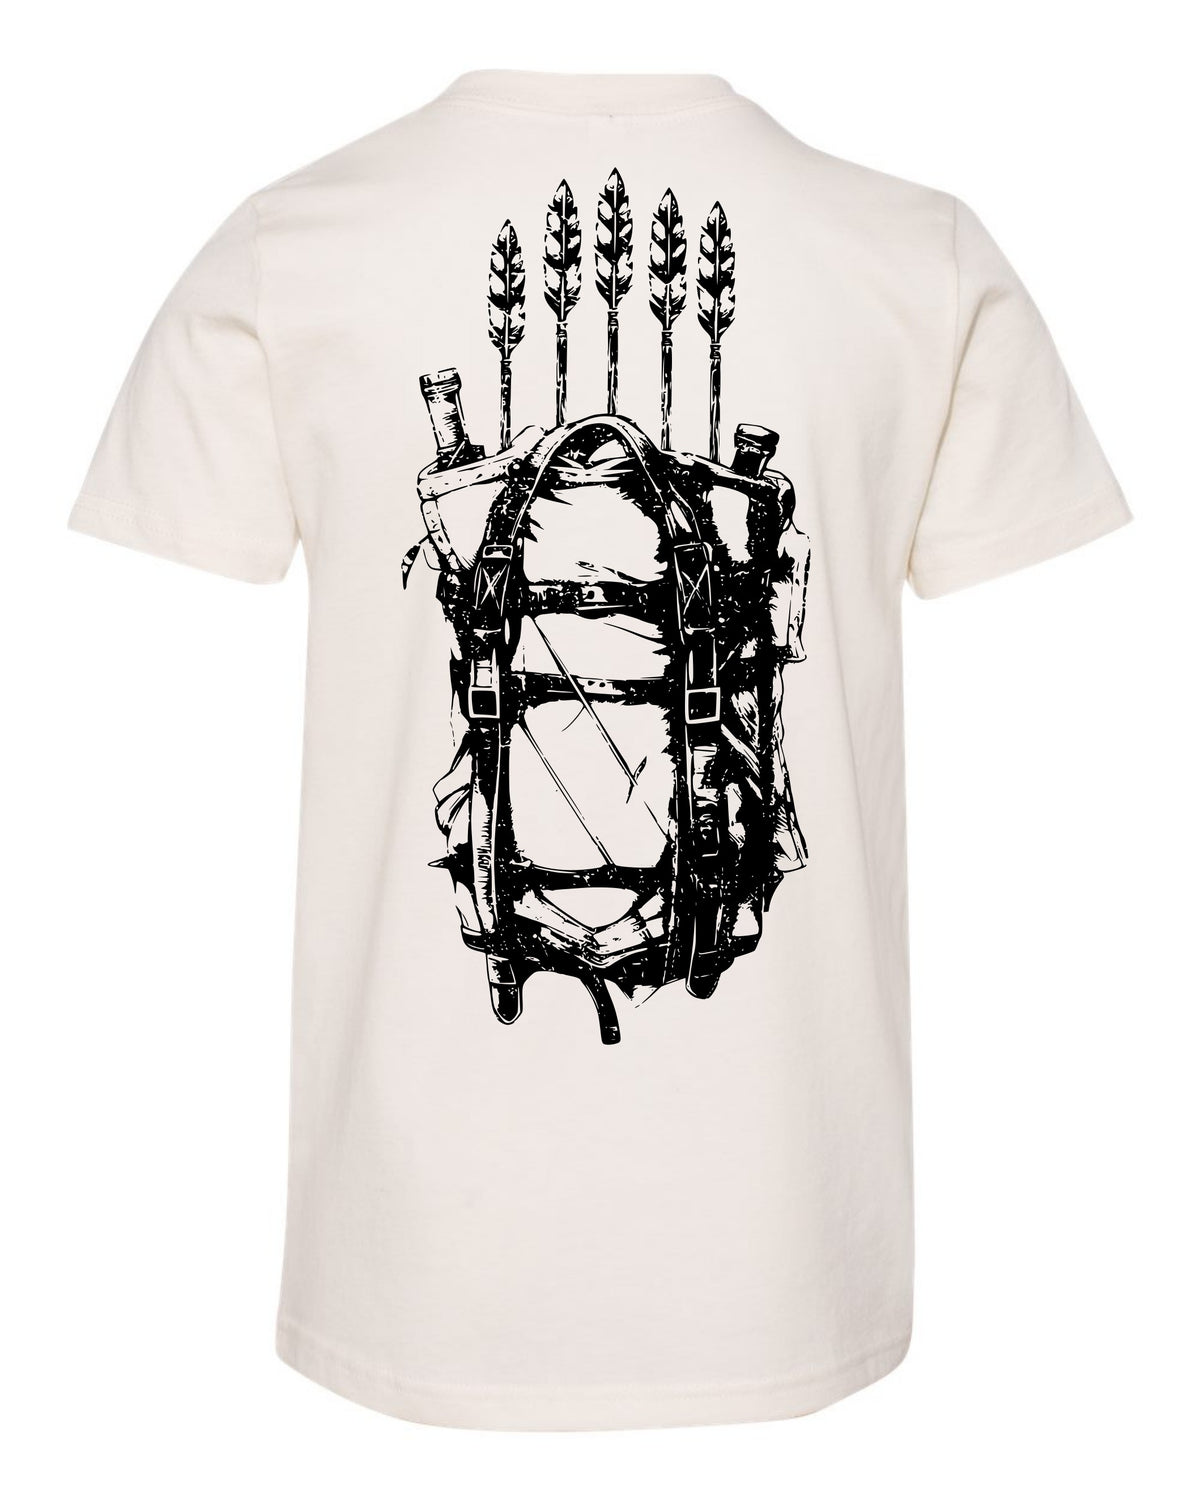 Full Quiver - Adult Tee - Psalm 127